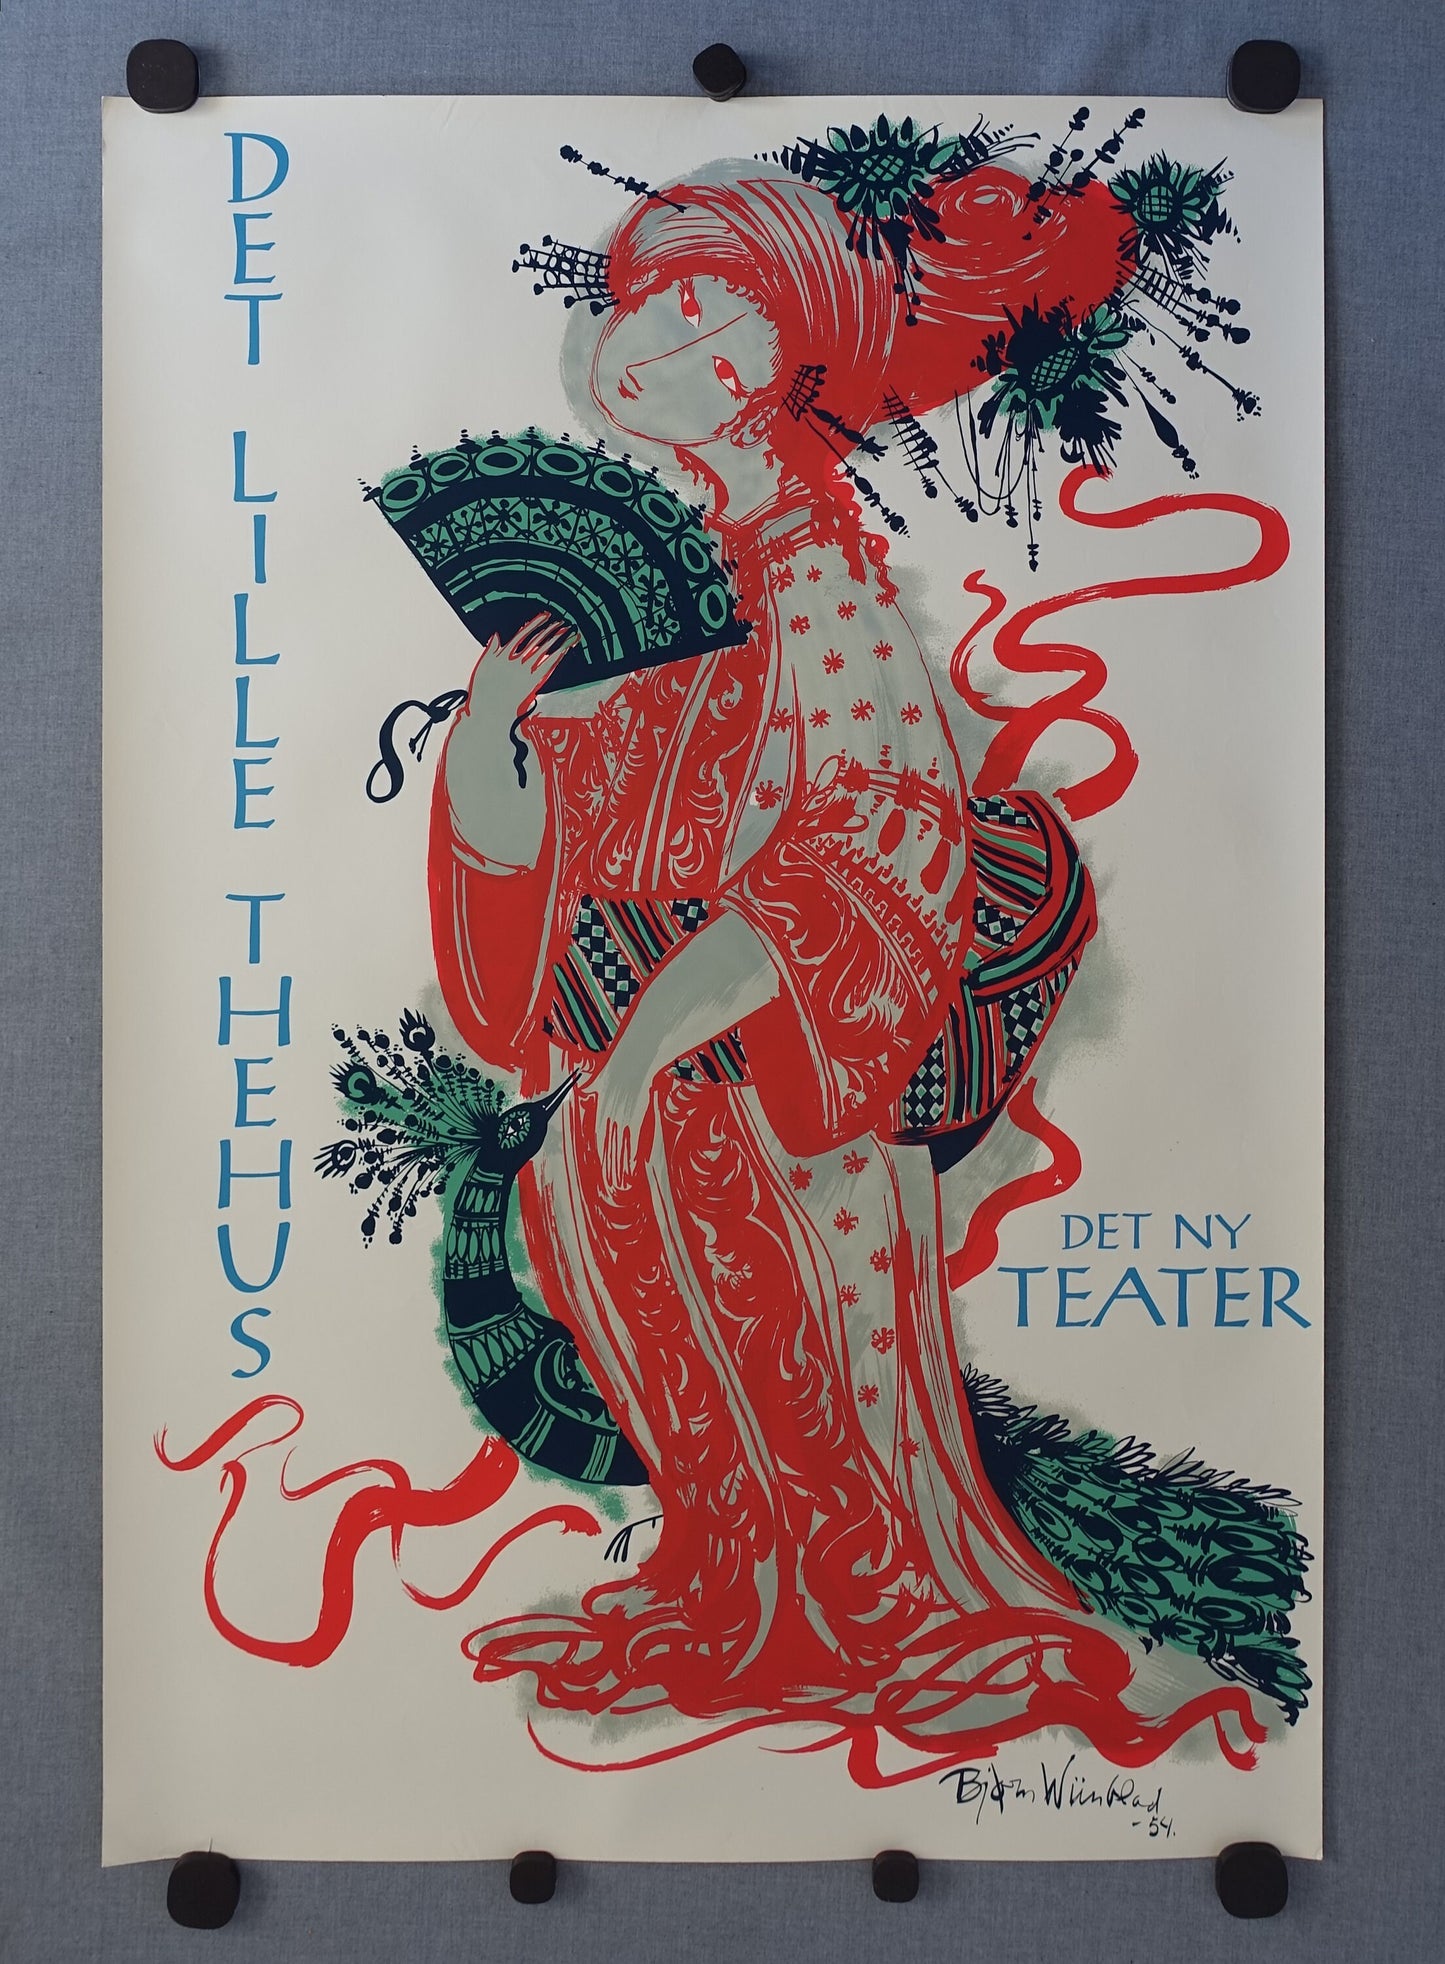 1954 Bjørn Wiinblad's "The Teahouse of the August Moon" at The New Theater - Original Vintage Poster